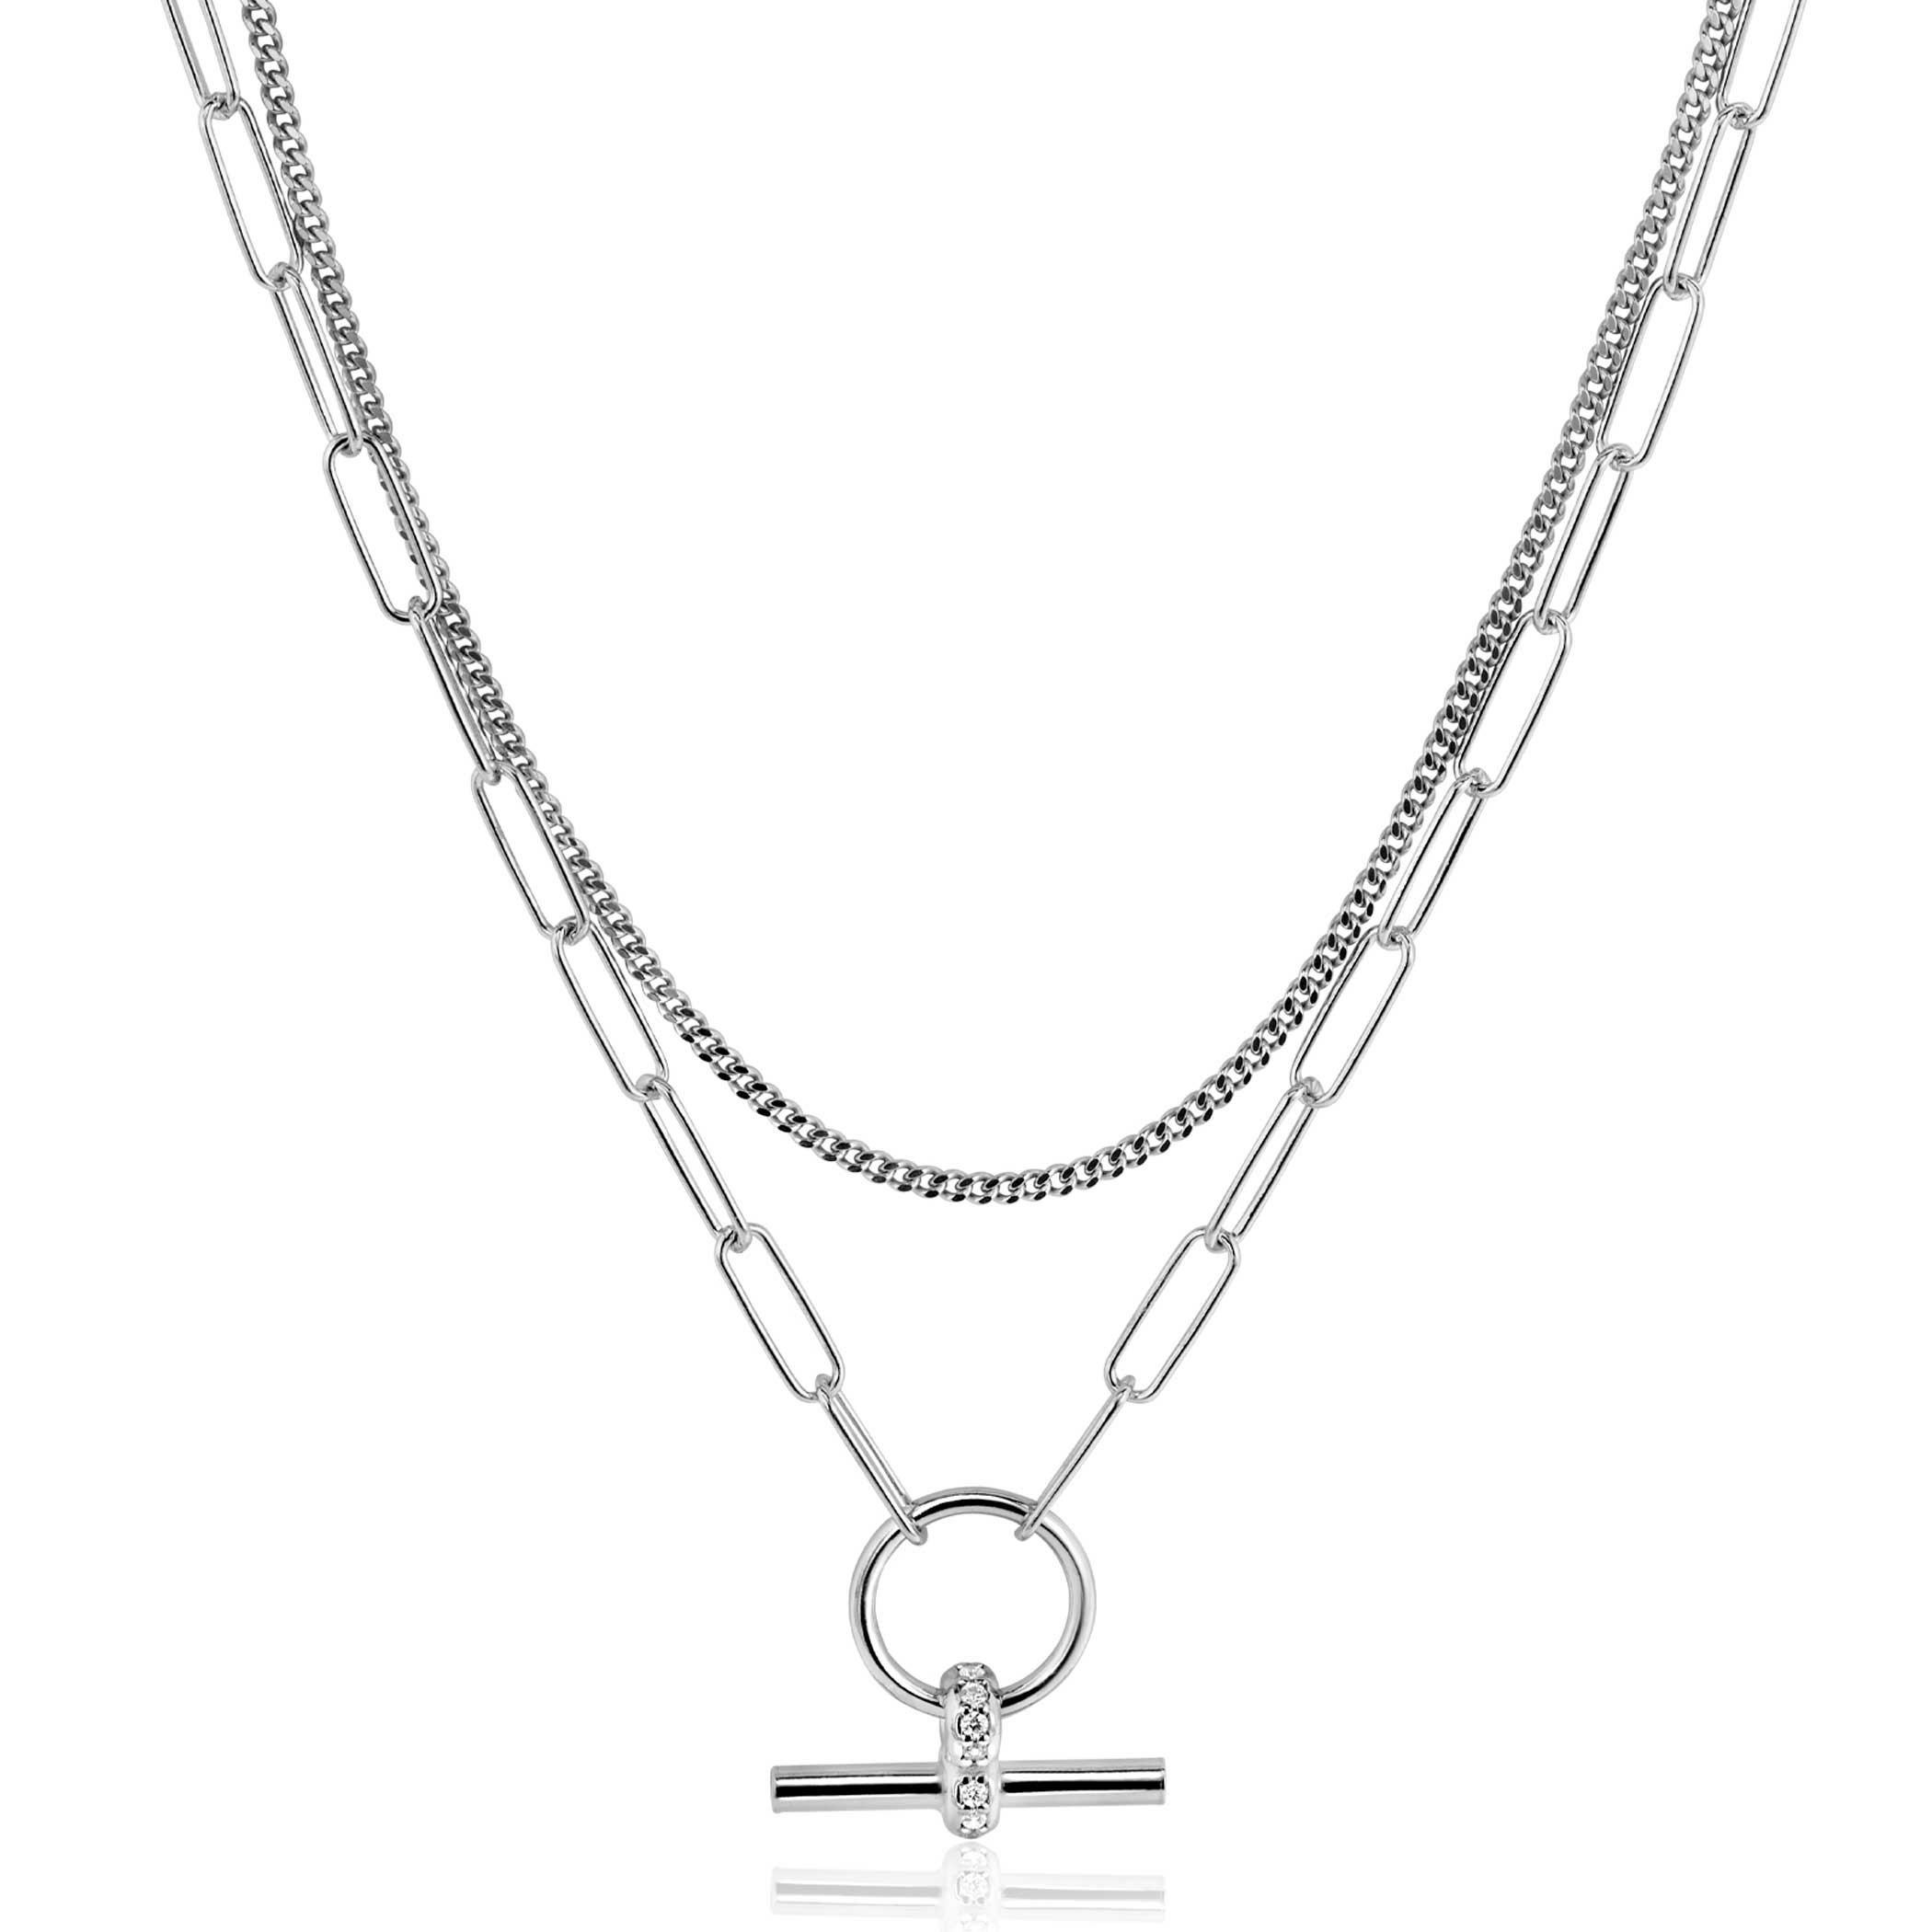 ZINZI Sterling Silver Multi-look Necklace 50cm: Combination of Curb and Paperclip Chains with Trendy T-Bar Set with White Zirconias ZIC2462